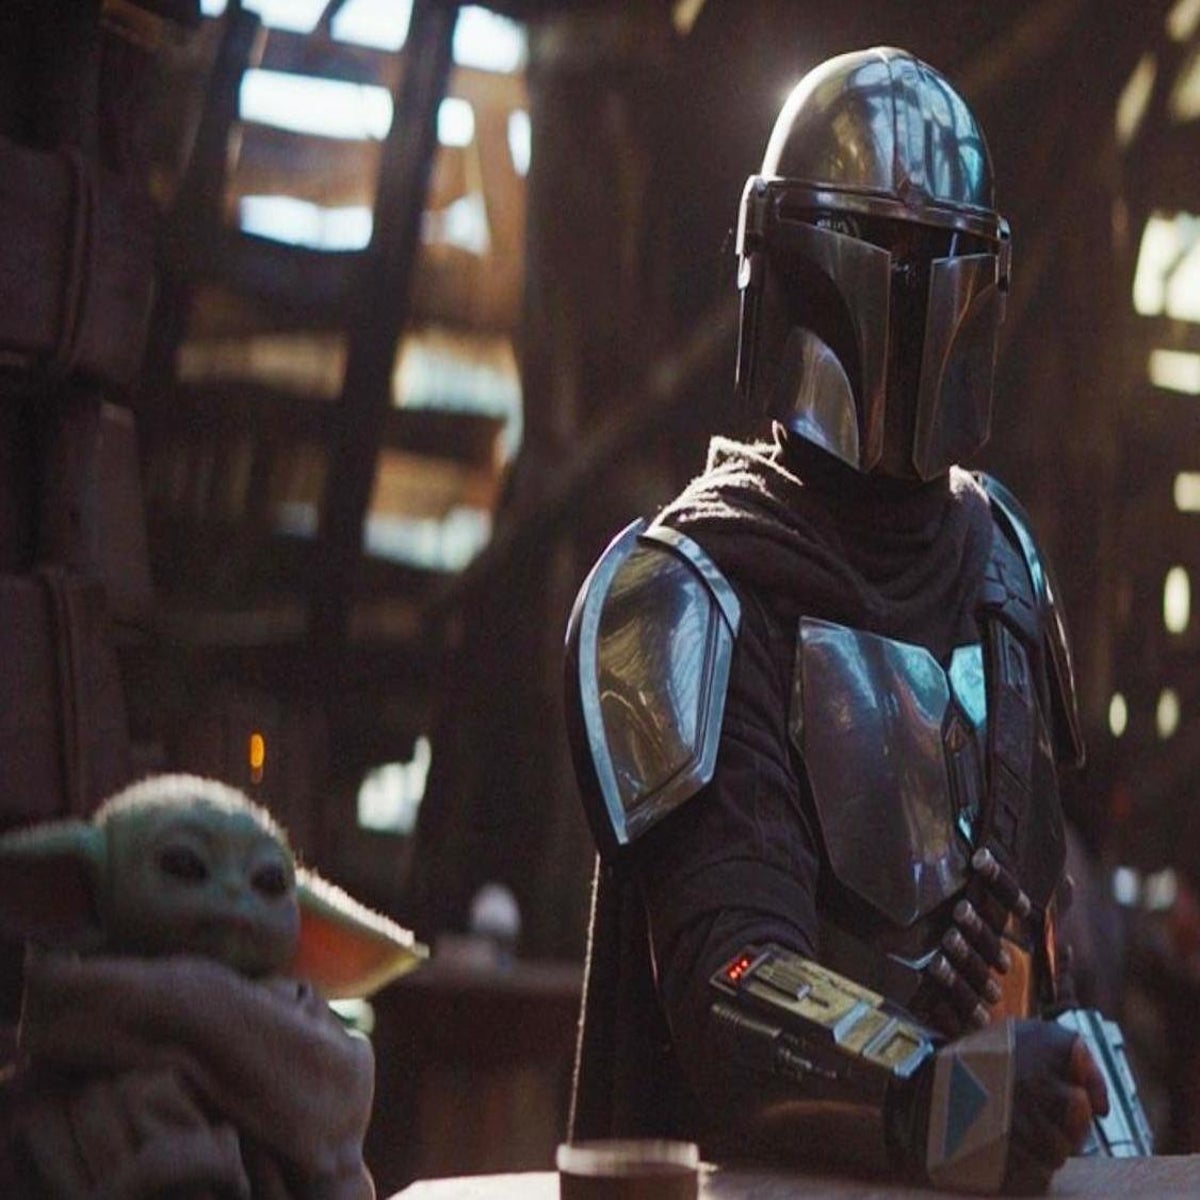 What do you guys want to see in The Mandalorian movie? I hope